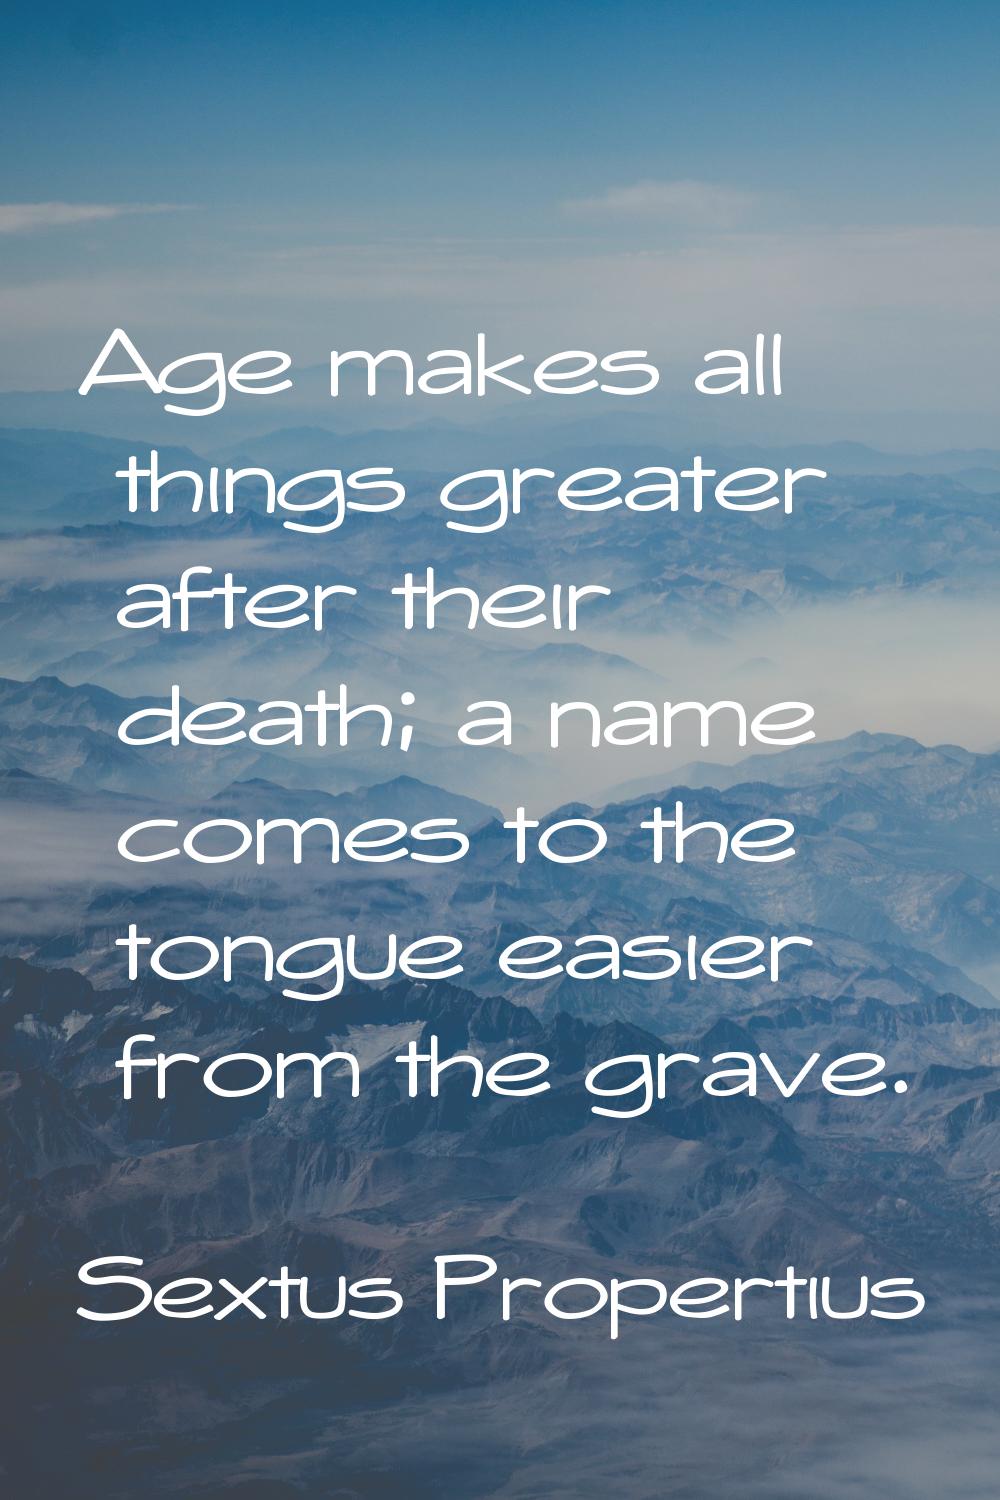 Age makes all things greater after their death; a name comes to the tongue easier from the grave.